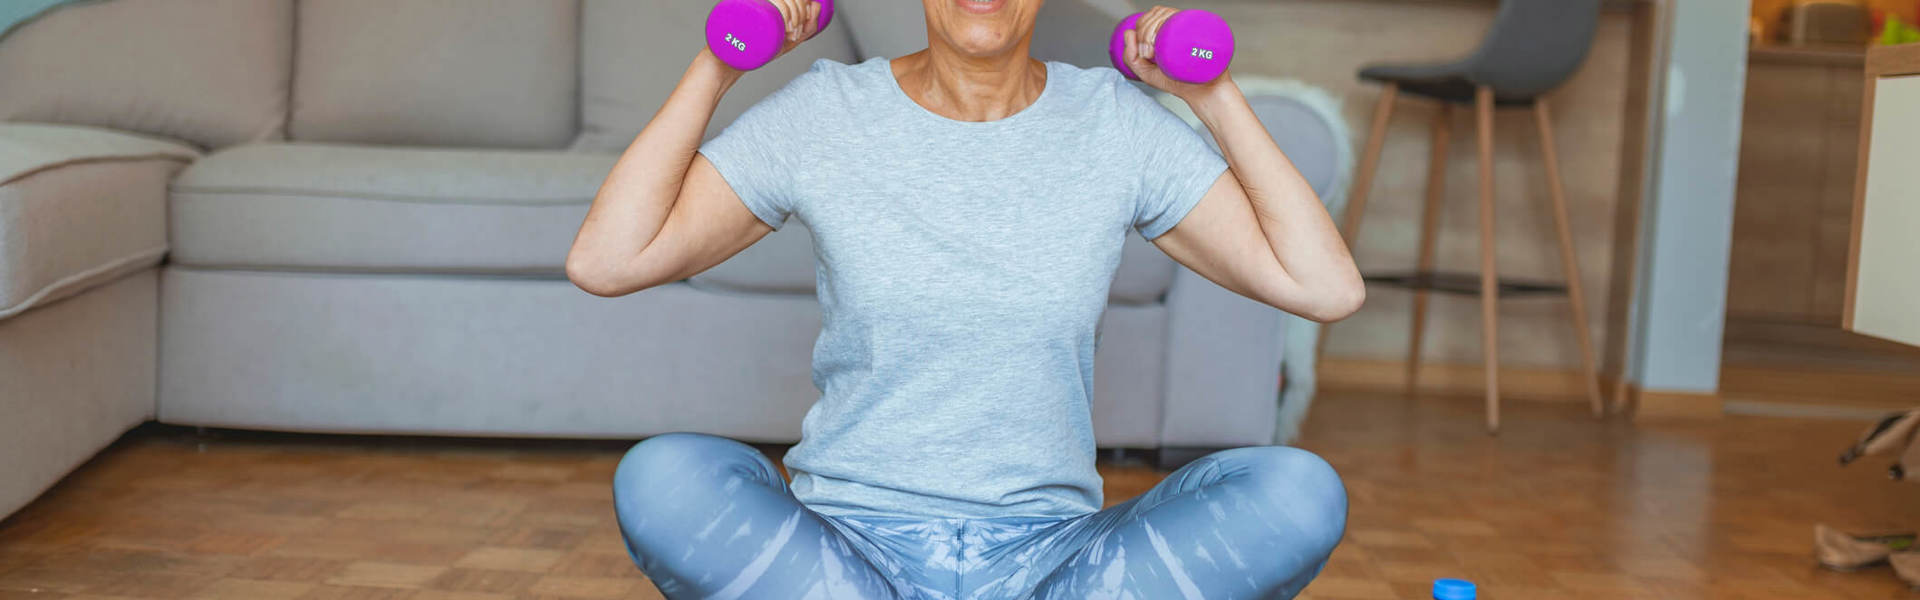 a woman with white grey hair sat cross legged on the floor holding purple hand weights